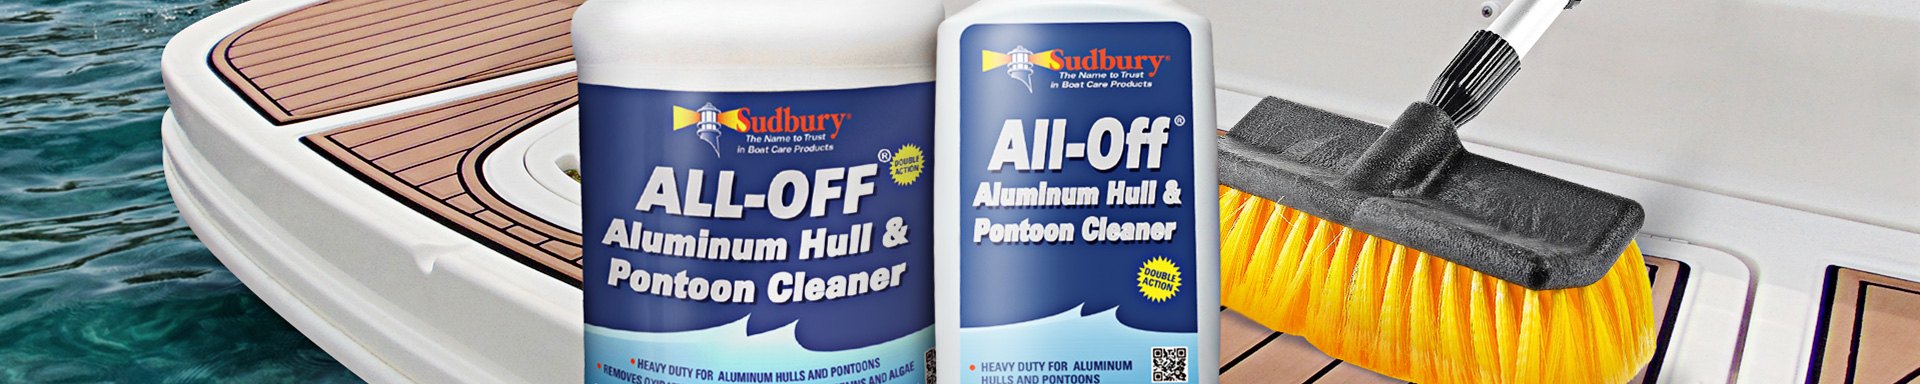 Sudbury Boat Care Cleaners & Chemicals